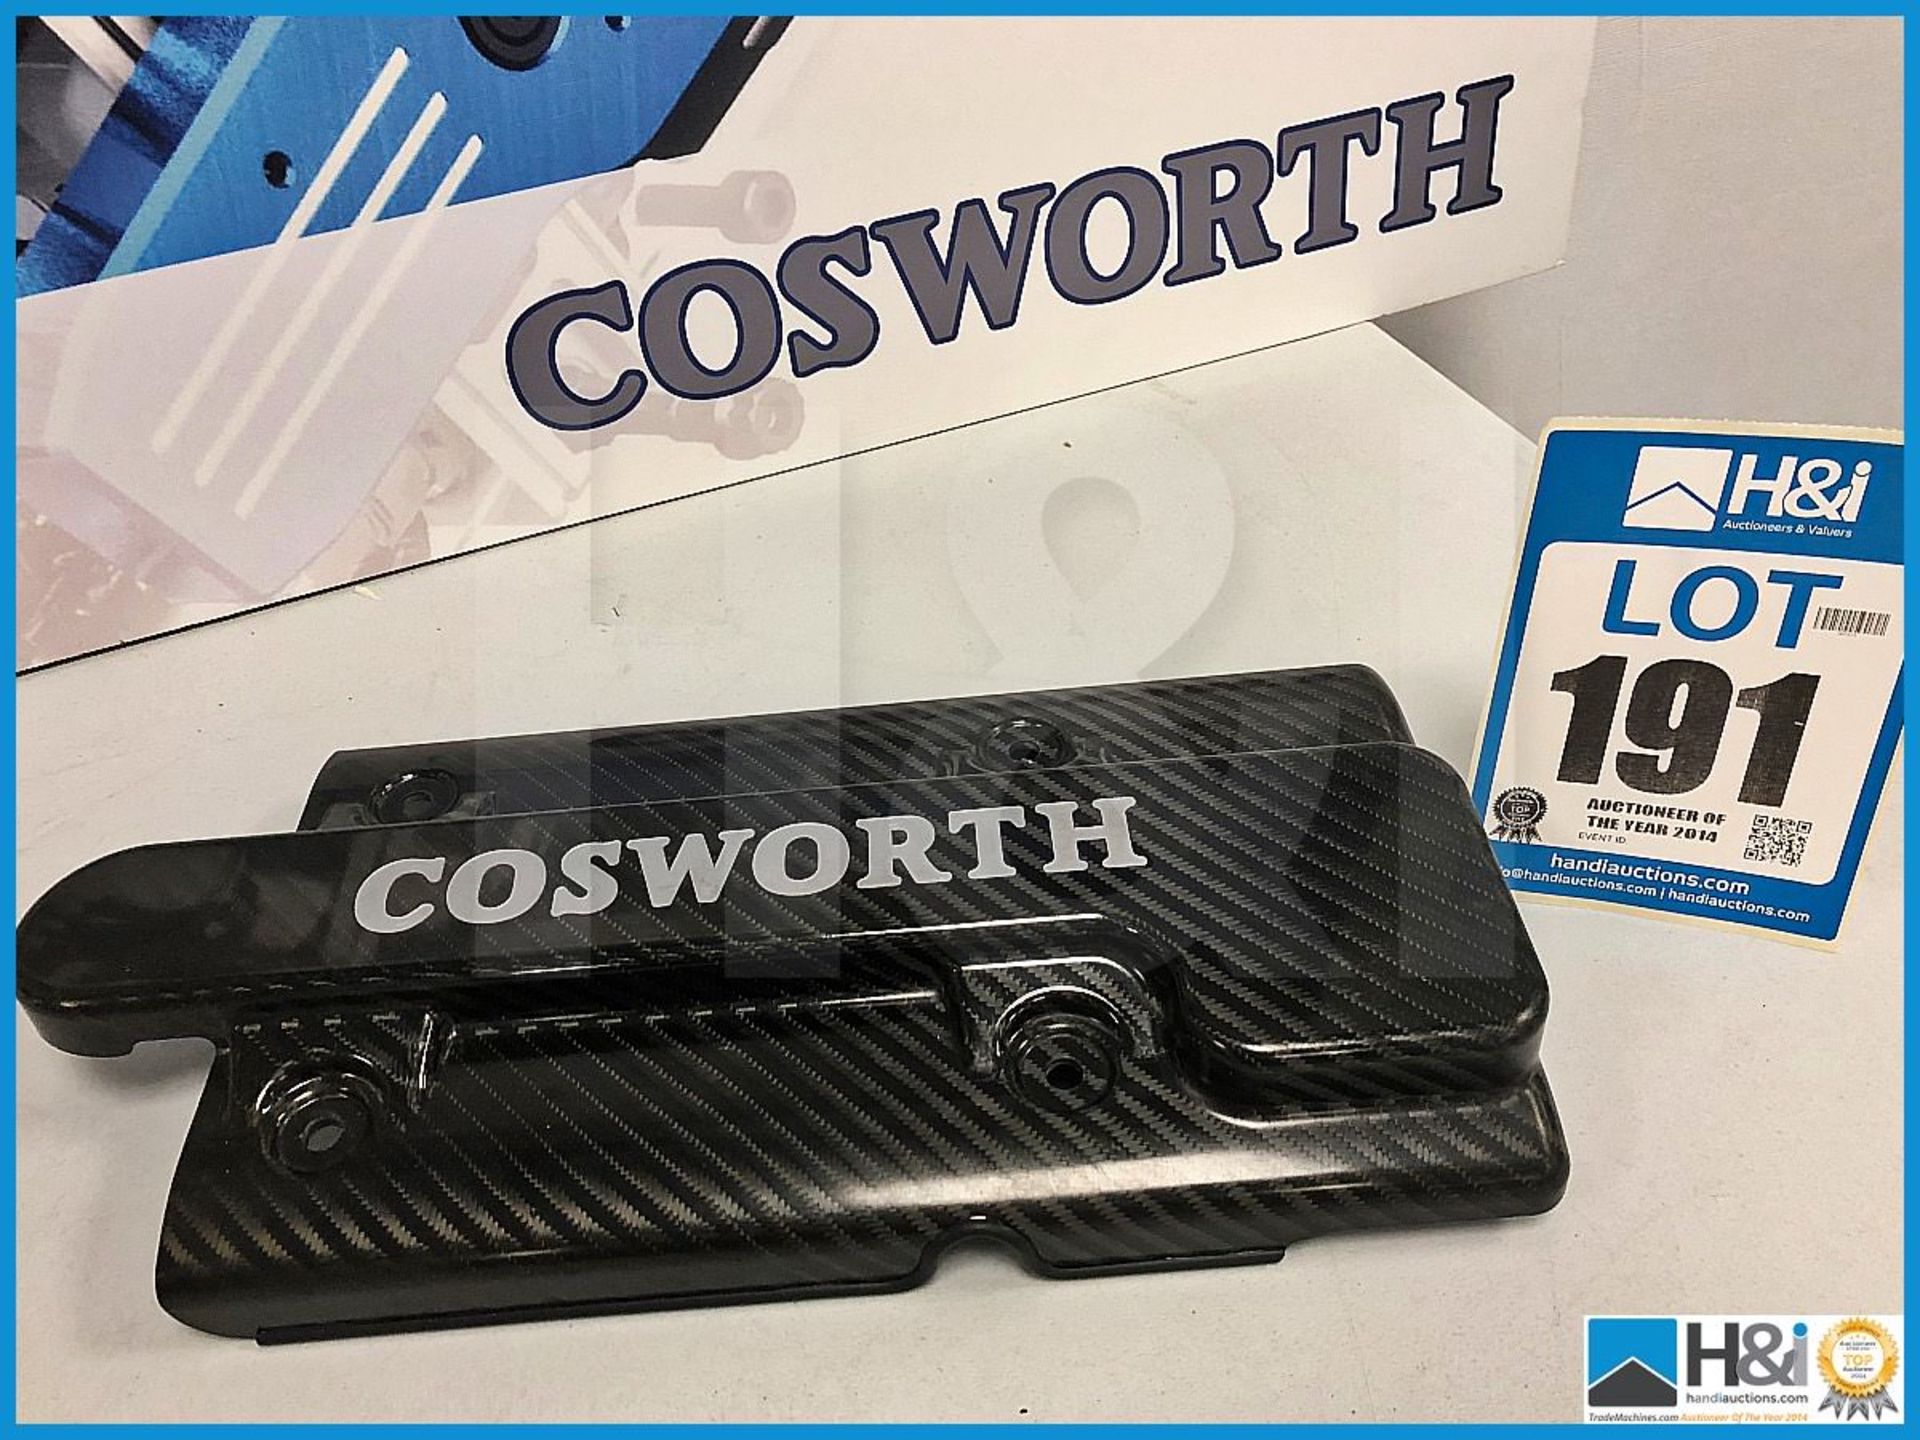 Cosworth Atlantic carbon fibre engine cover marked 'Cosworth'. We're avised that these can be modifi